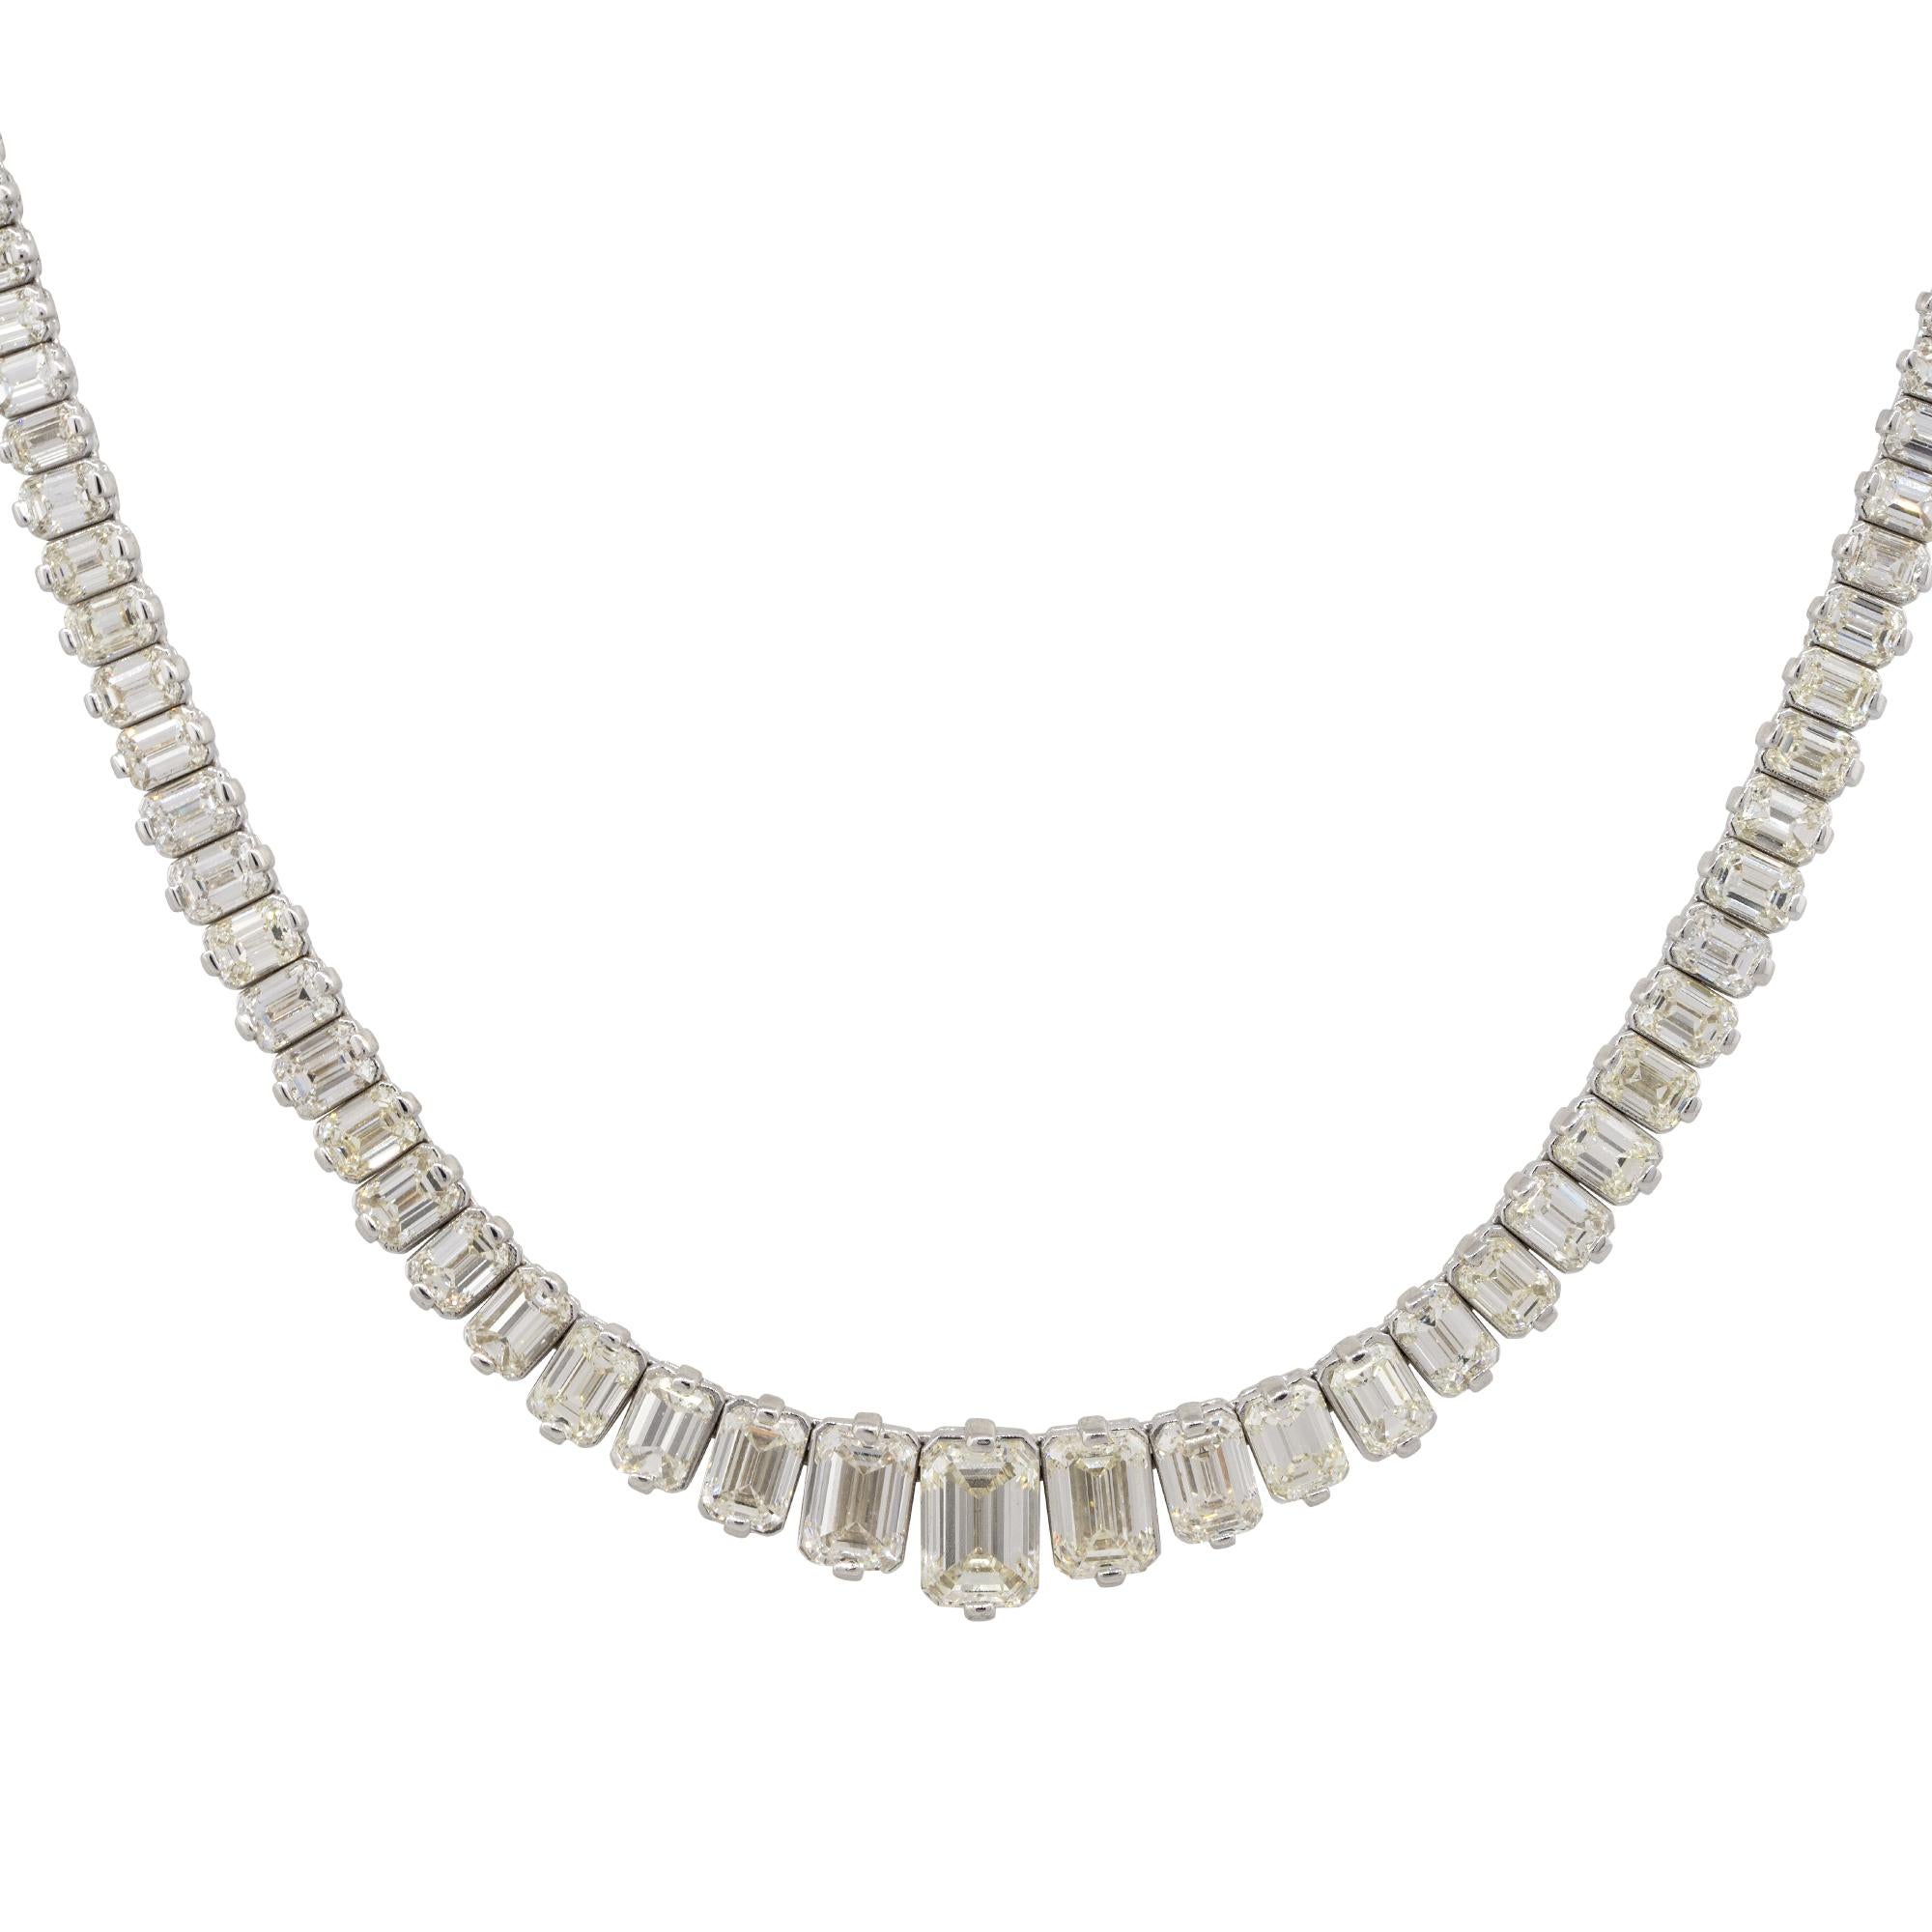 Material: 18k White Gold
Diamond Details: Approx. 28.58ctw of graduating Emerald cut Diamonds. Diamonds are J in color and VS1 in clarity
Measurements: Necklace measures 16